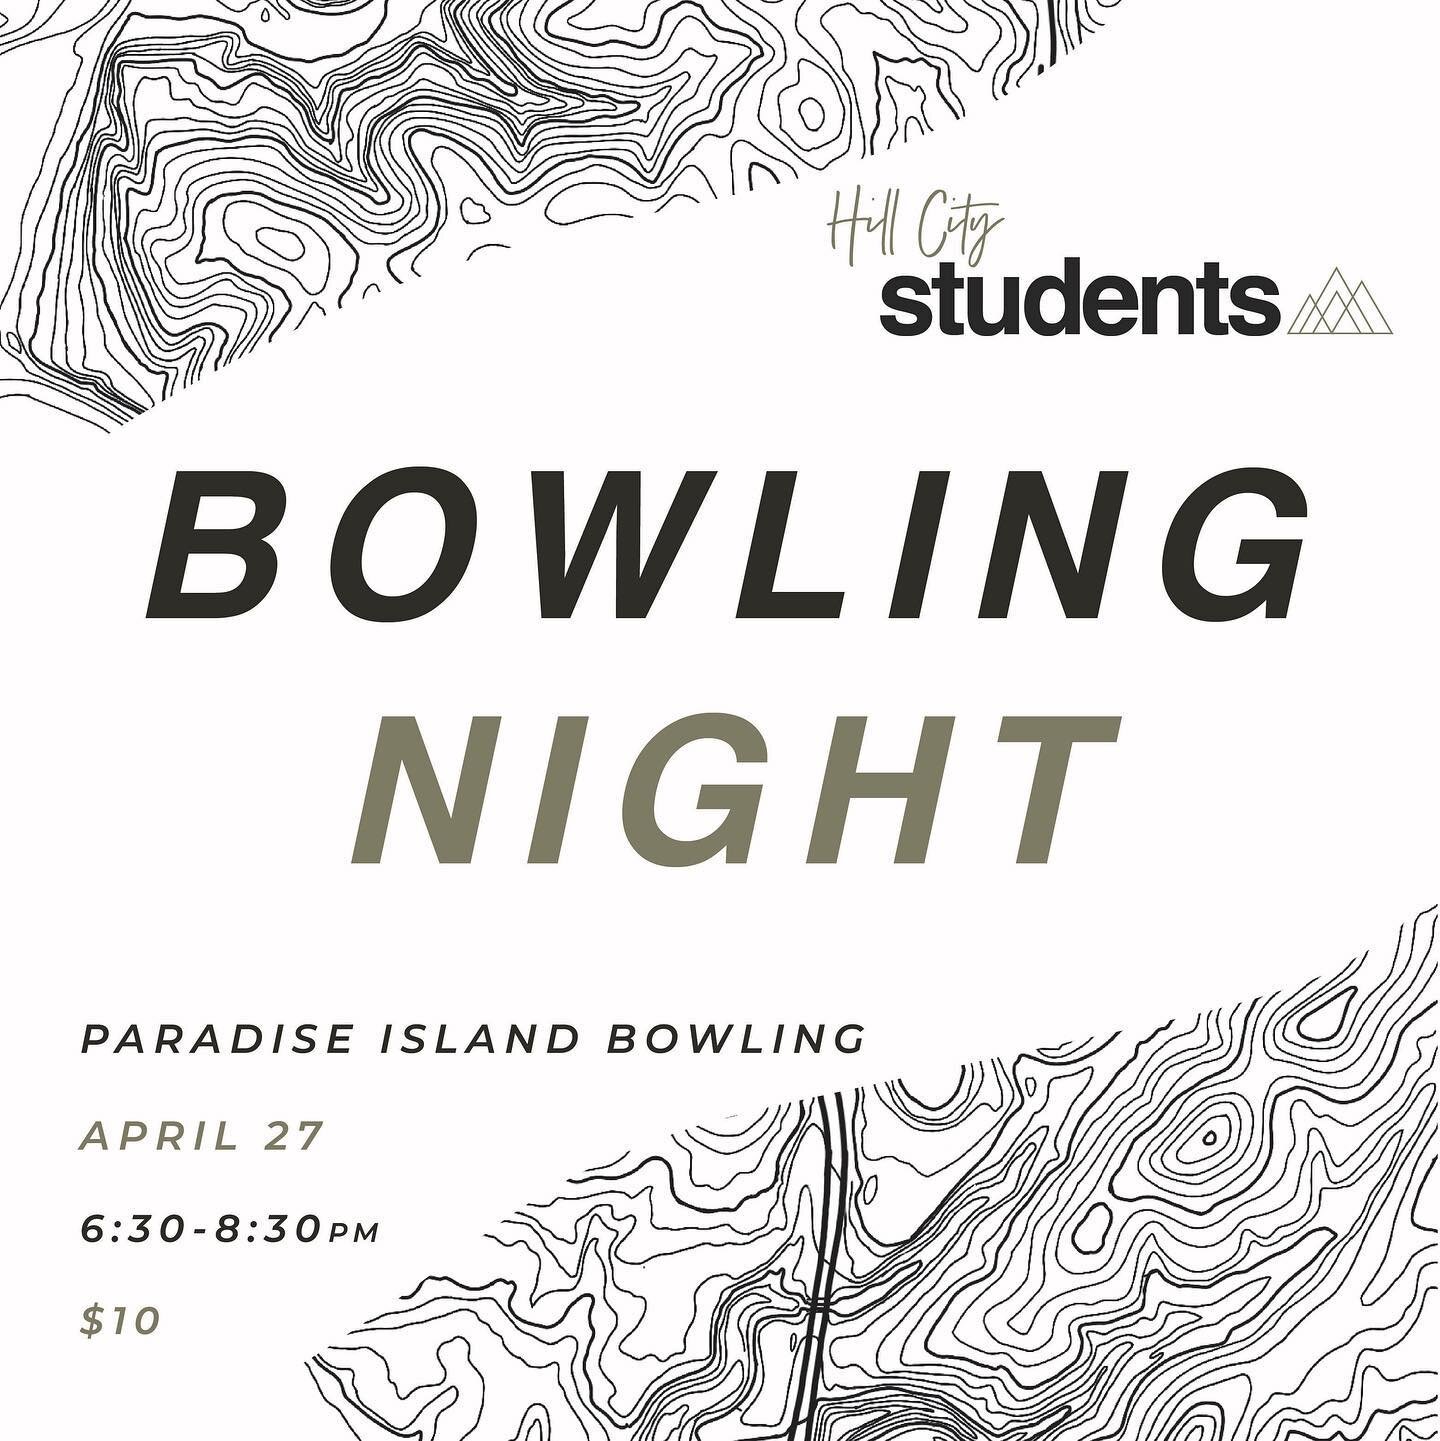 What&rsquo;s up Hill City Students fam! Our bowling night is just 2 weeks away! For only $10 you get 2 hours of bowling, bowling shoes, pizza and pop. Make sure to invite a bunch of friends, it&rsquo;s gonna be a great time!